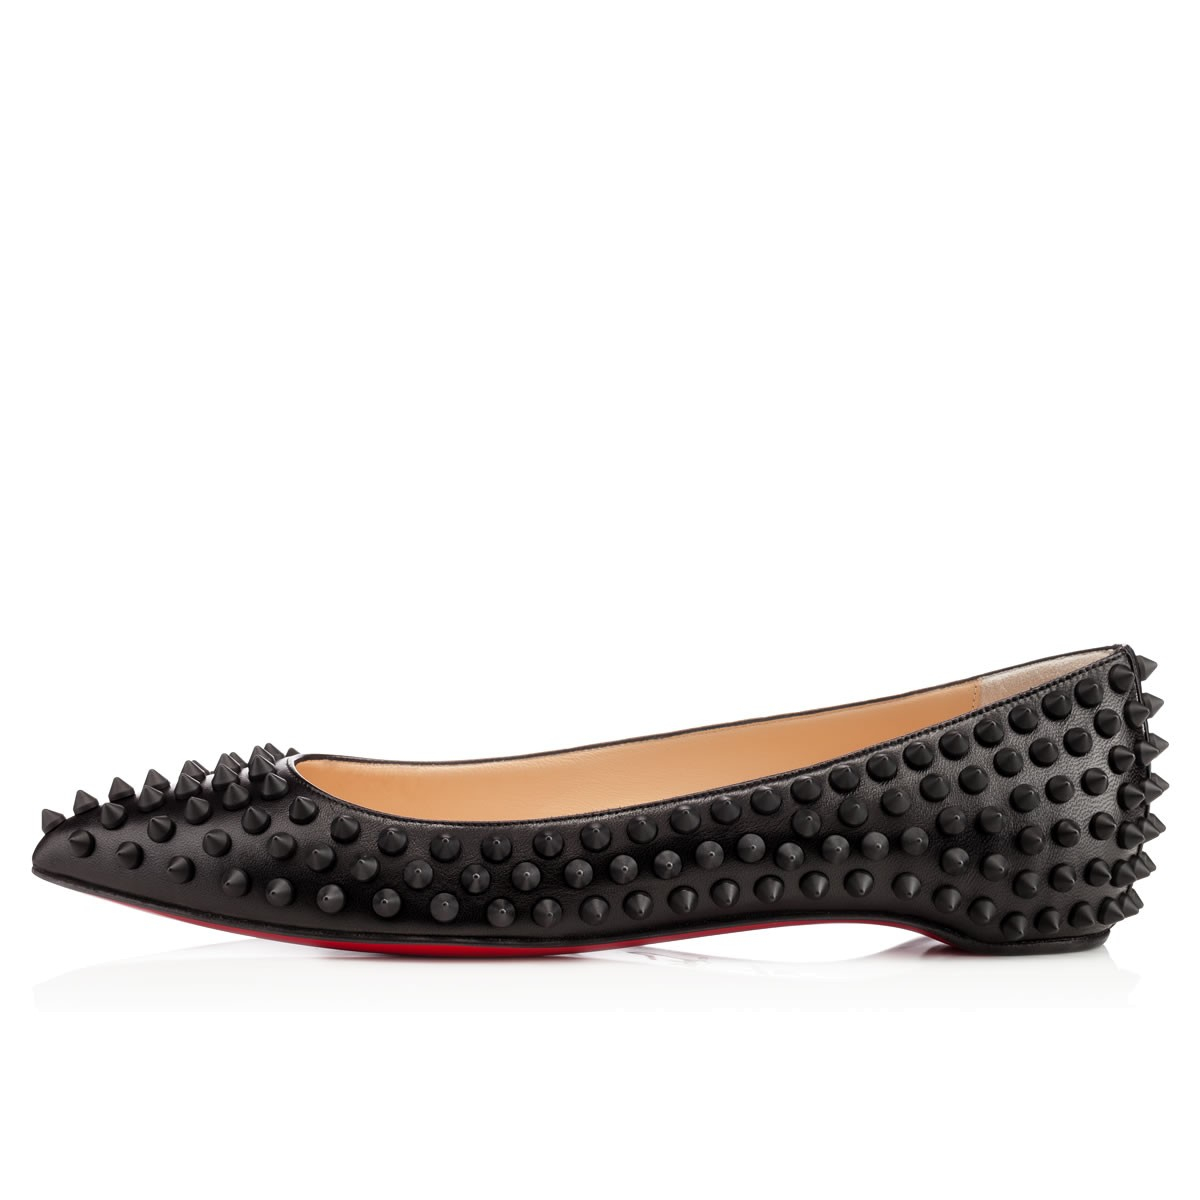 louboutin studded sneakers price - Peony Design ? christian louboutin pigalle spiked metallic leather ...